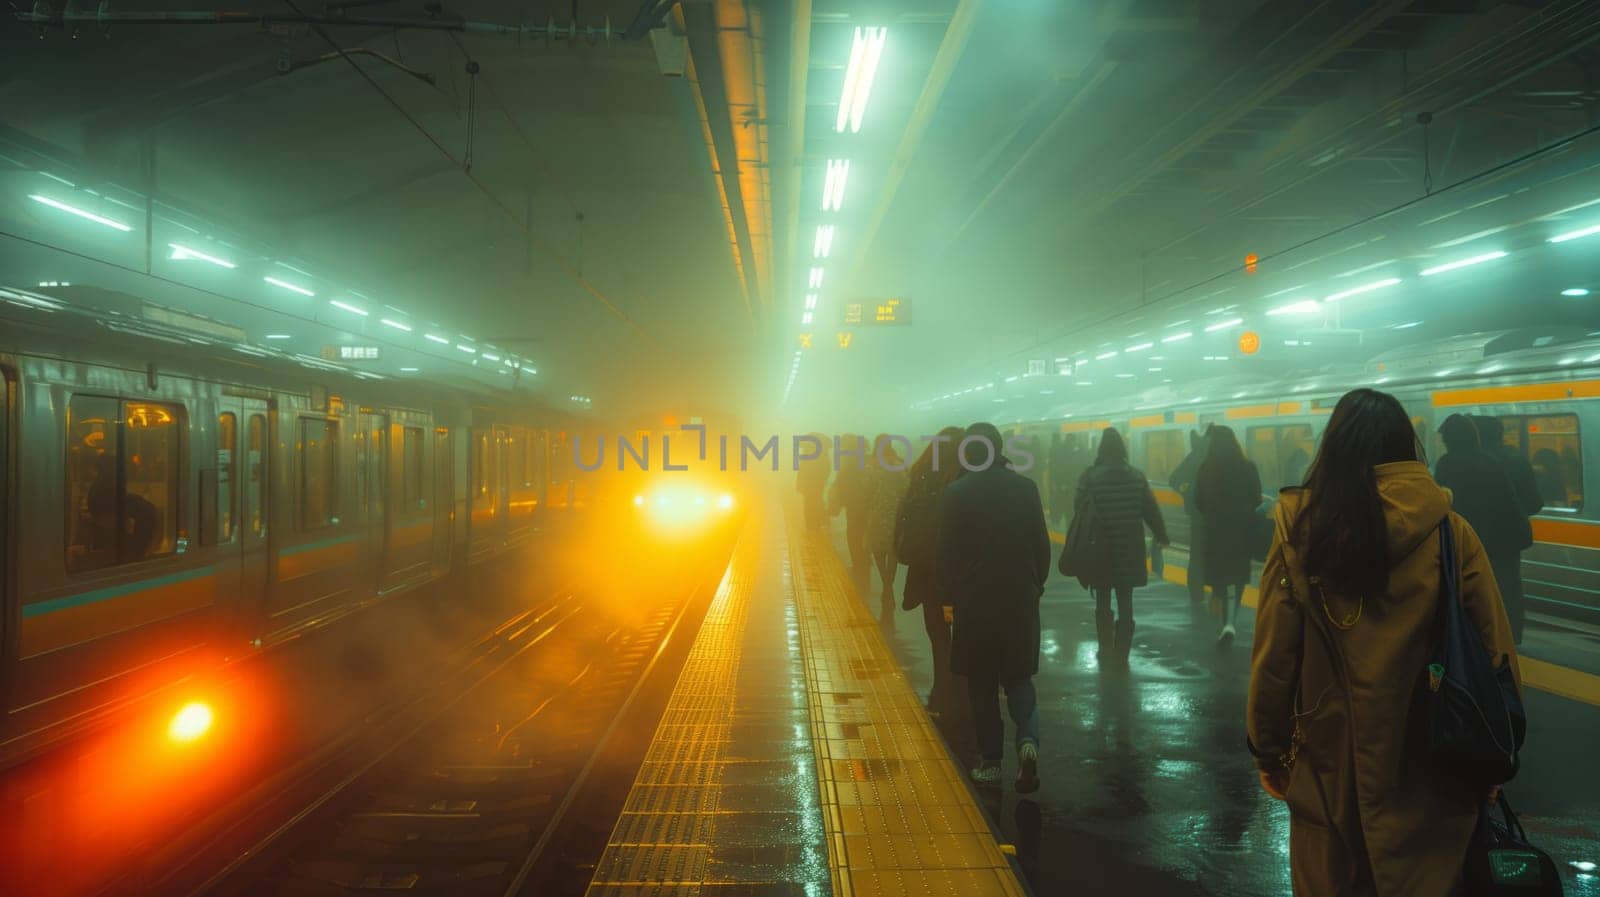 a group of people are walking on a train platform in a foggy subway station by richwolf